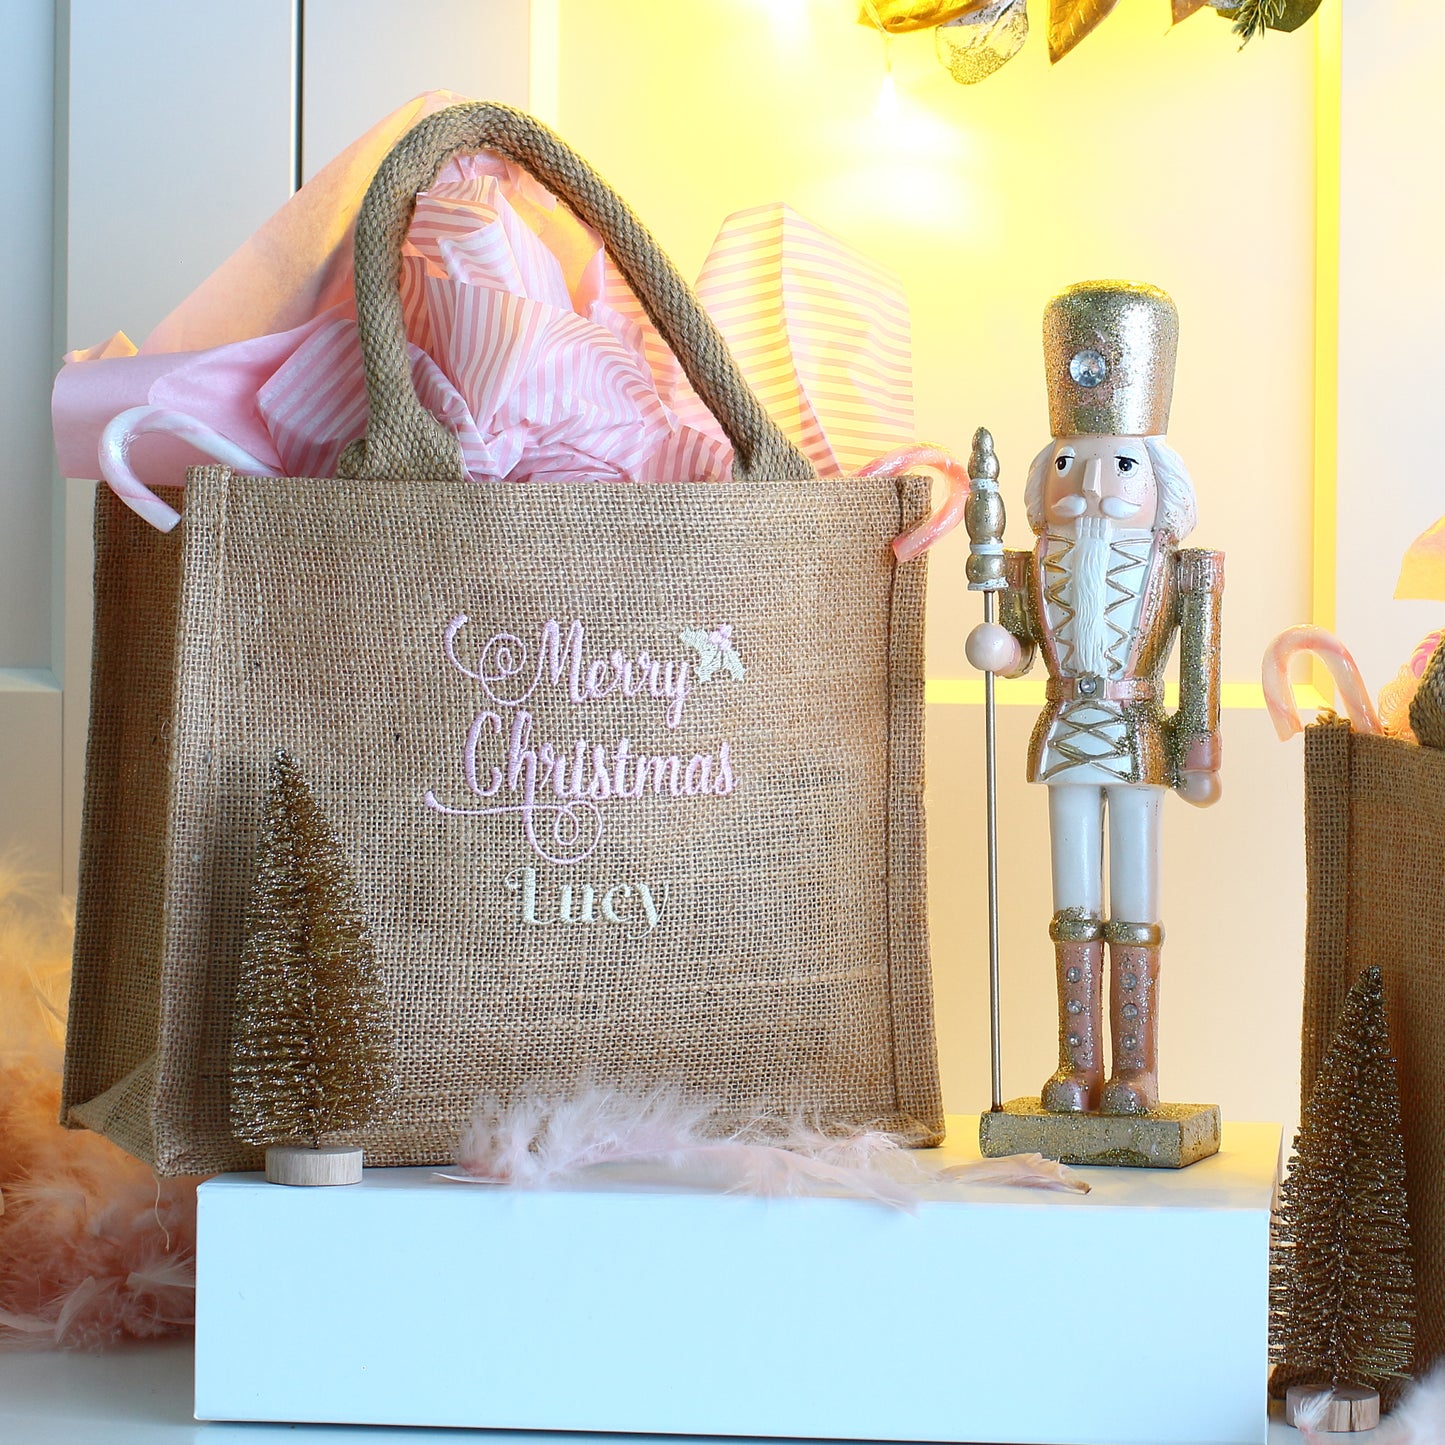 NEW - Small Merry Christmas bags - Pink